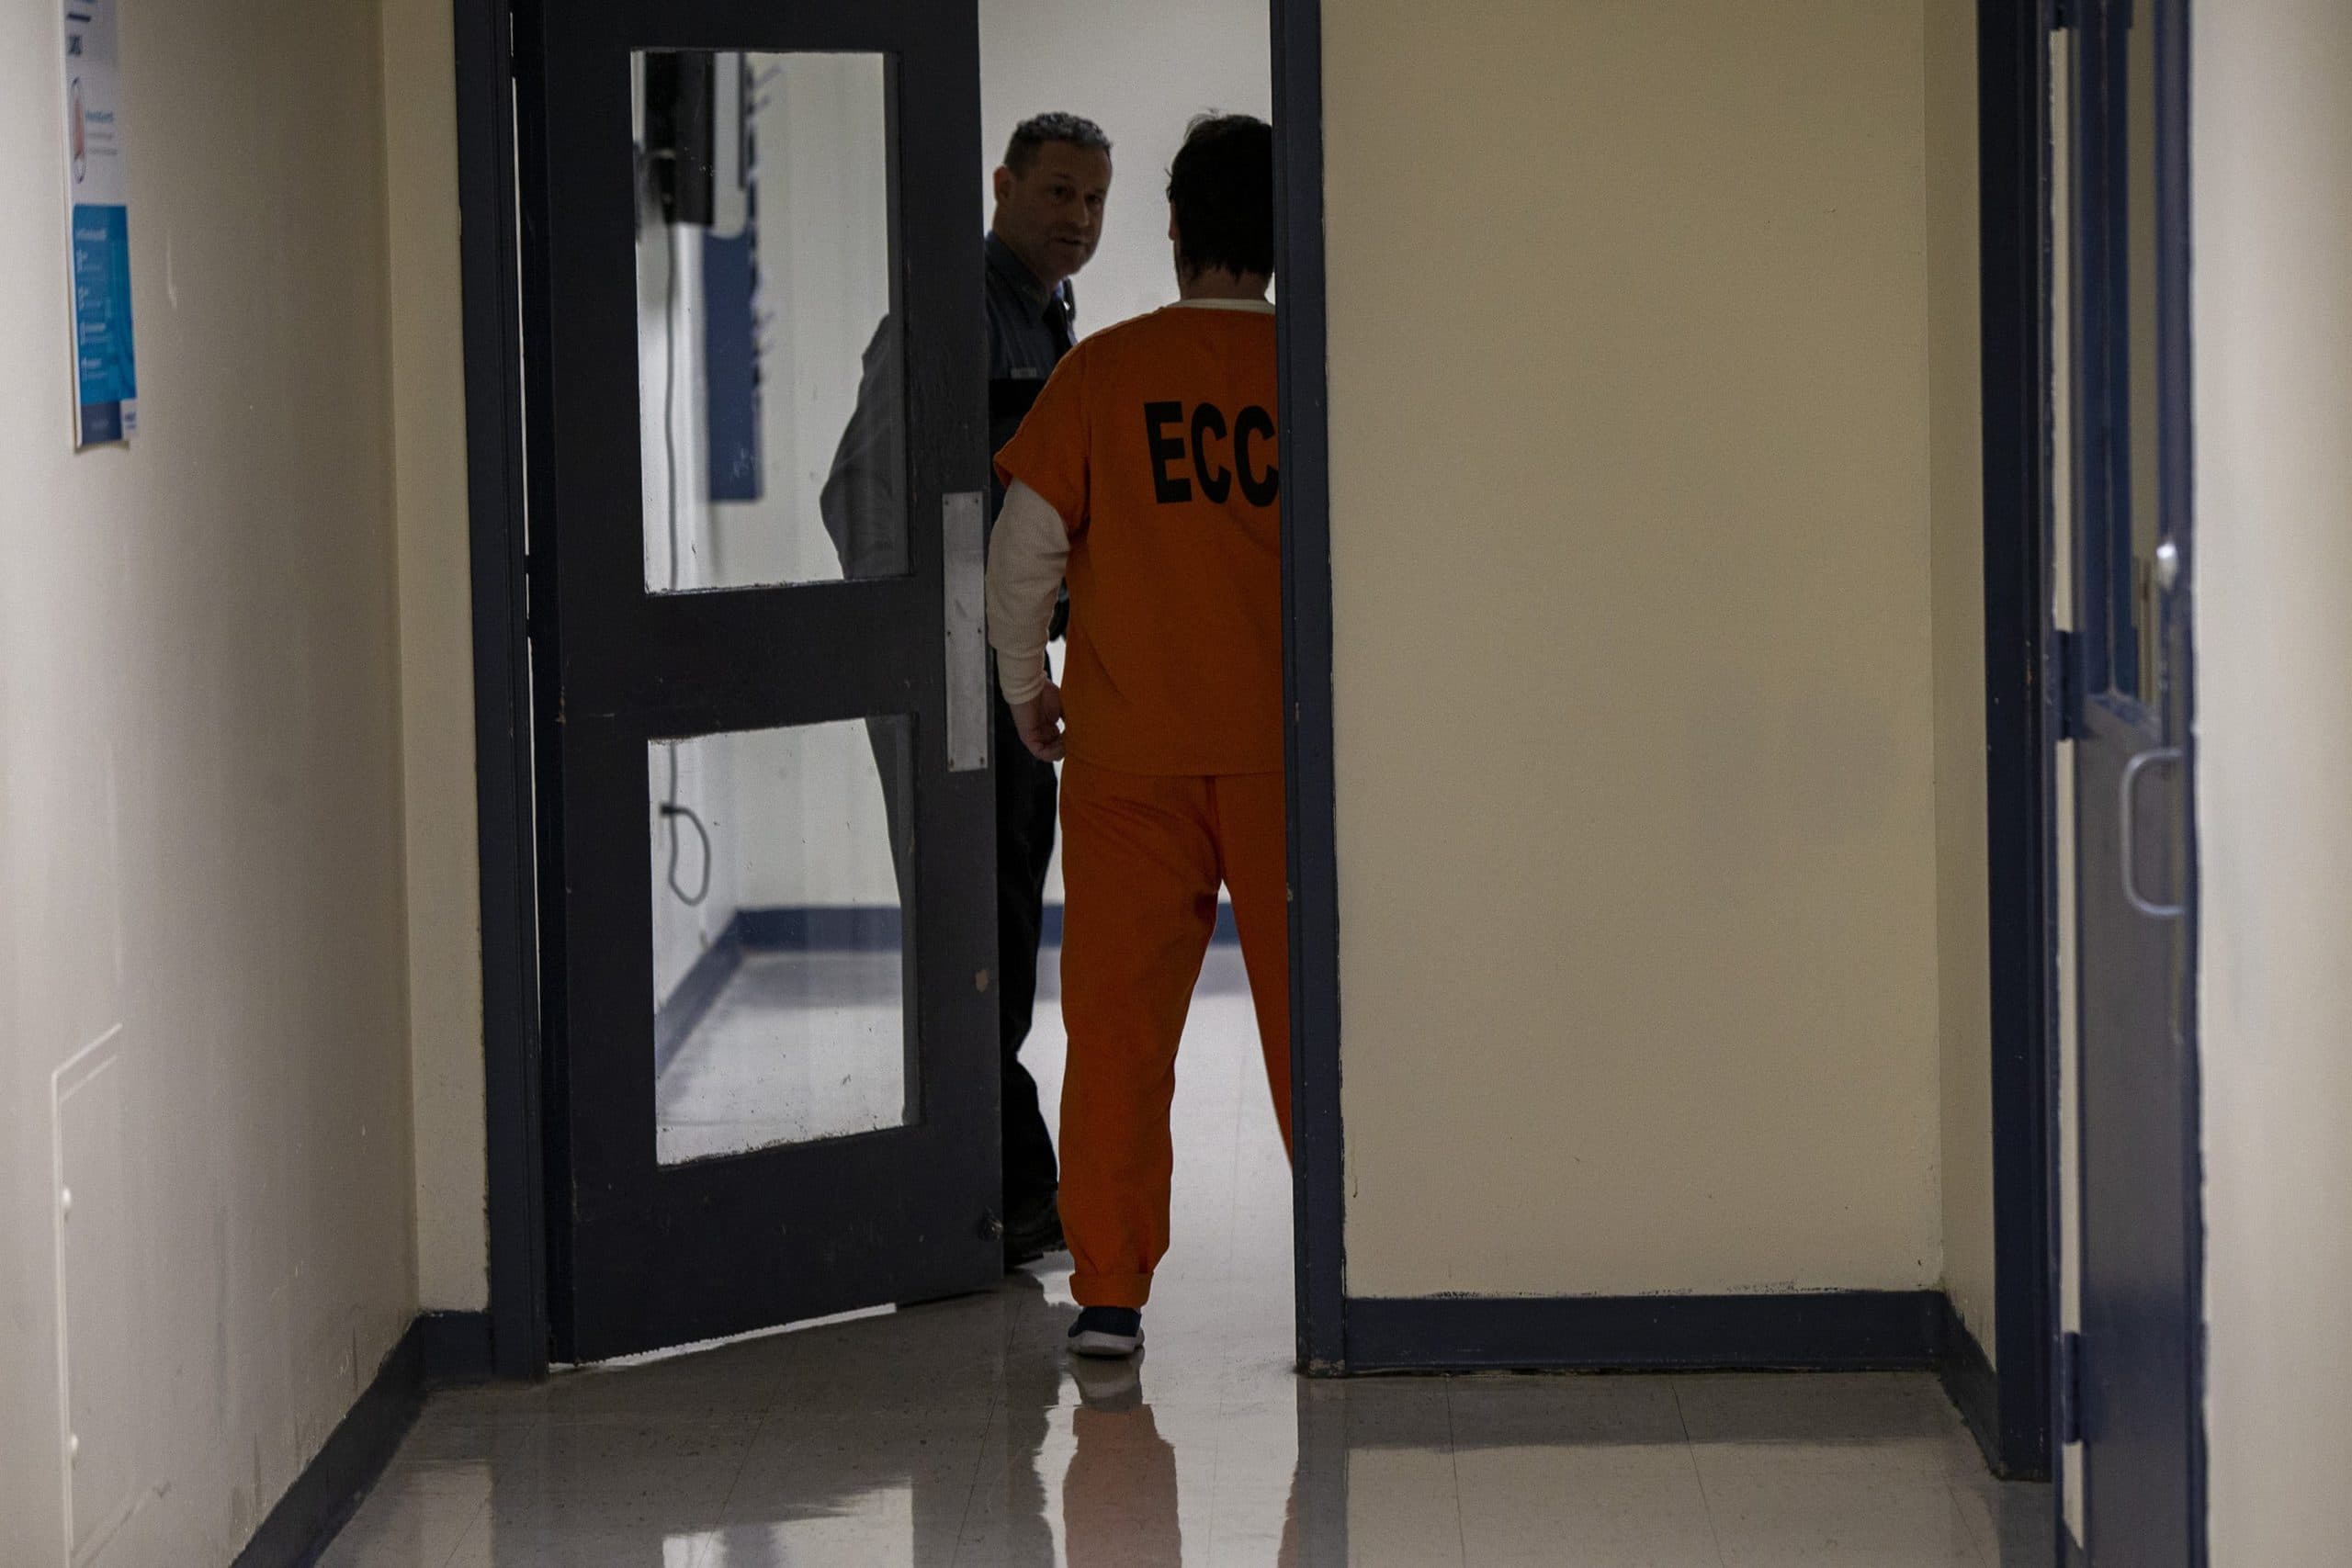 An Essex County jail corrections officer escorts an inmate through a hallway of the jail. (Jesse Costa/WBUR)